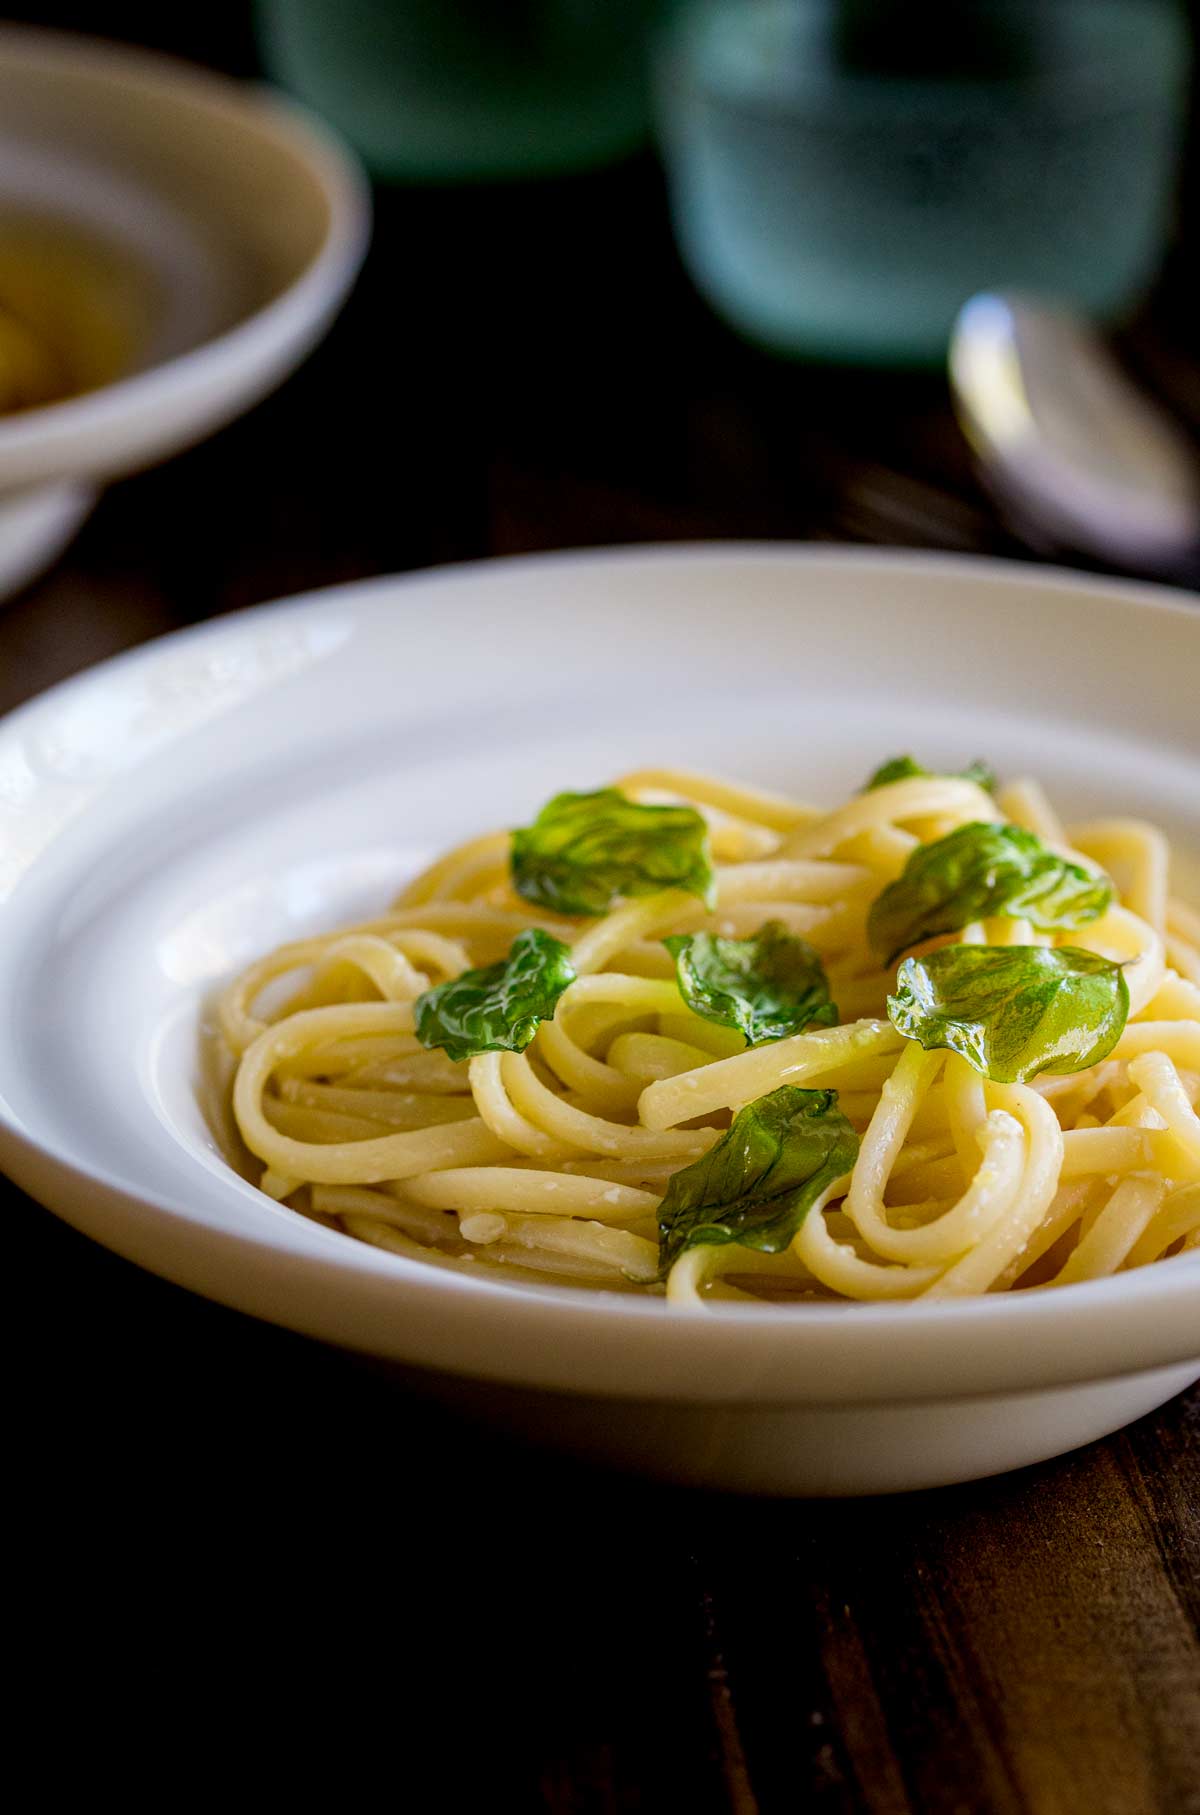 a white bowl on a dark table filled with pasta and garnished with basil leaves